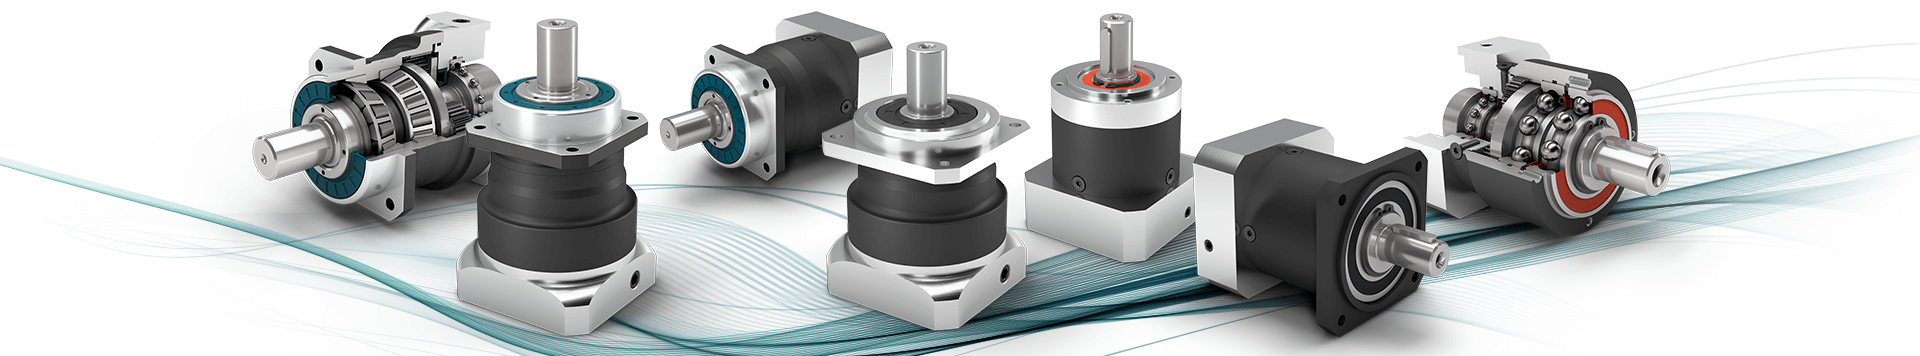 Panetary gearboxes with output shaft.